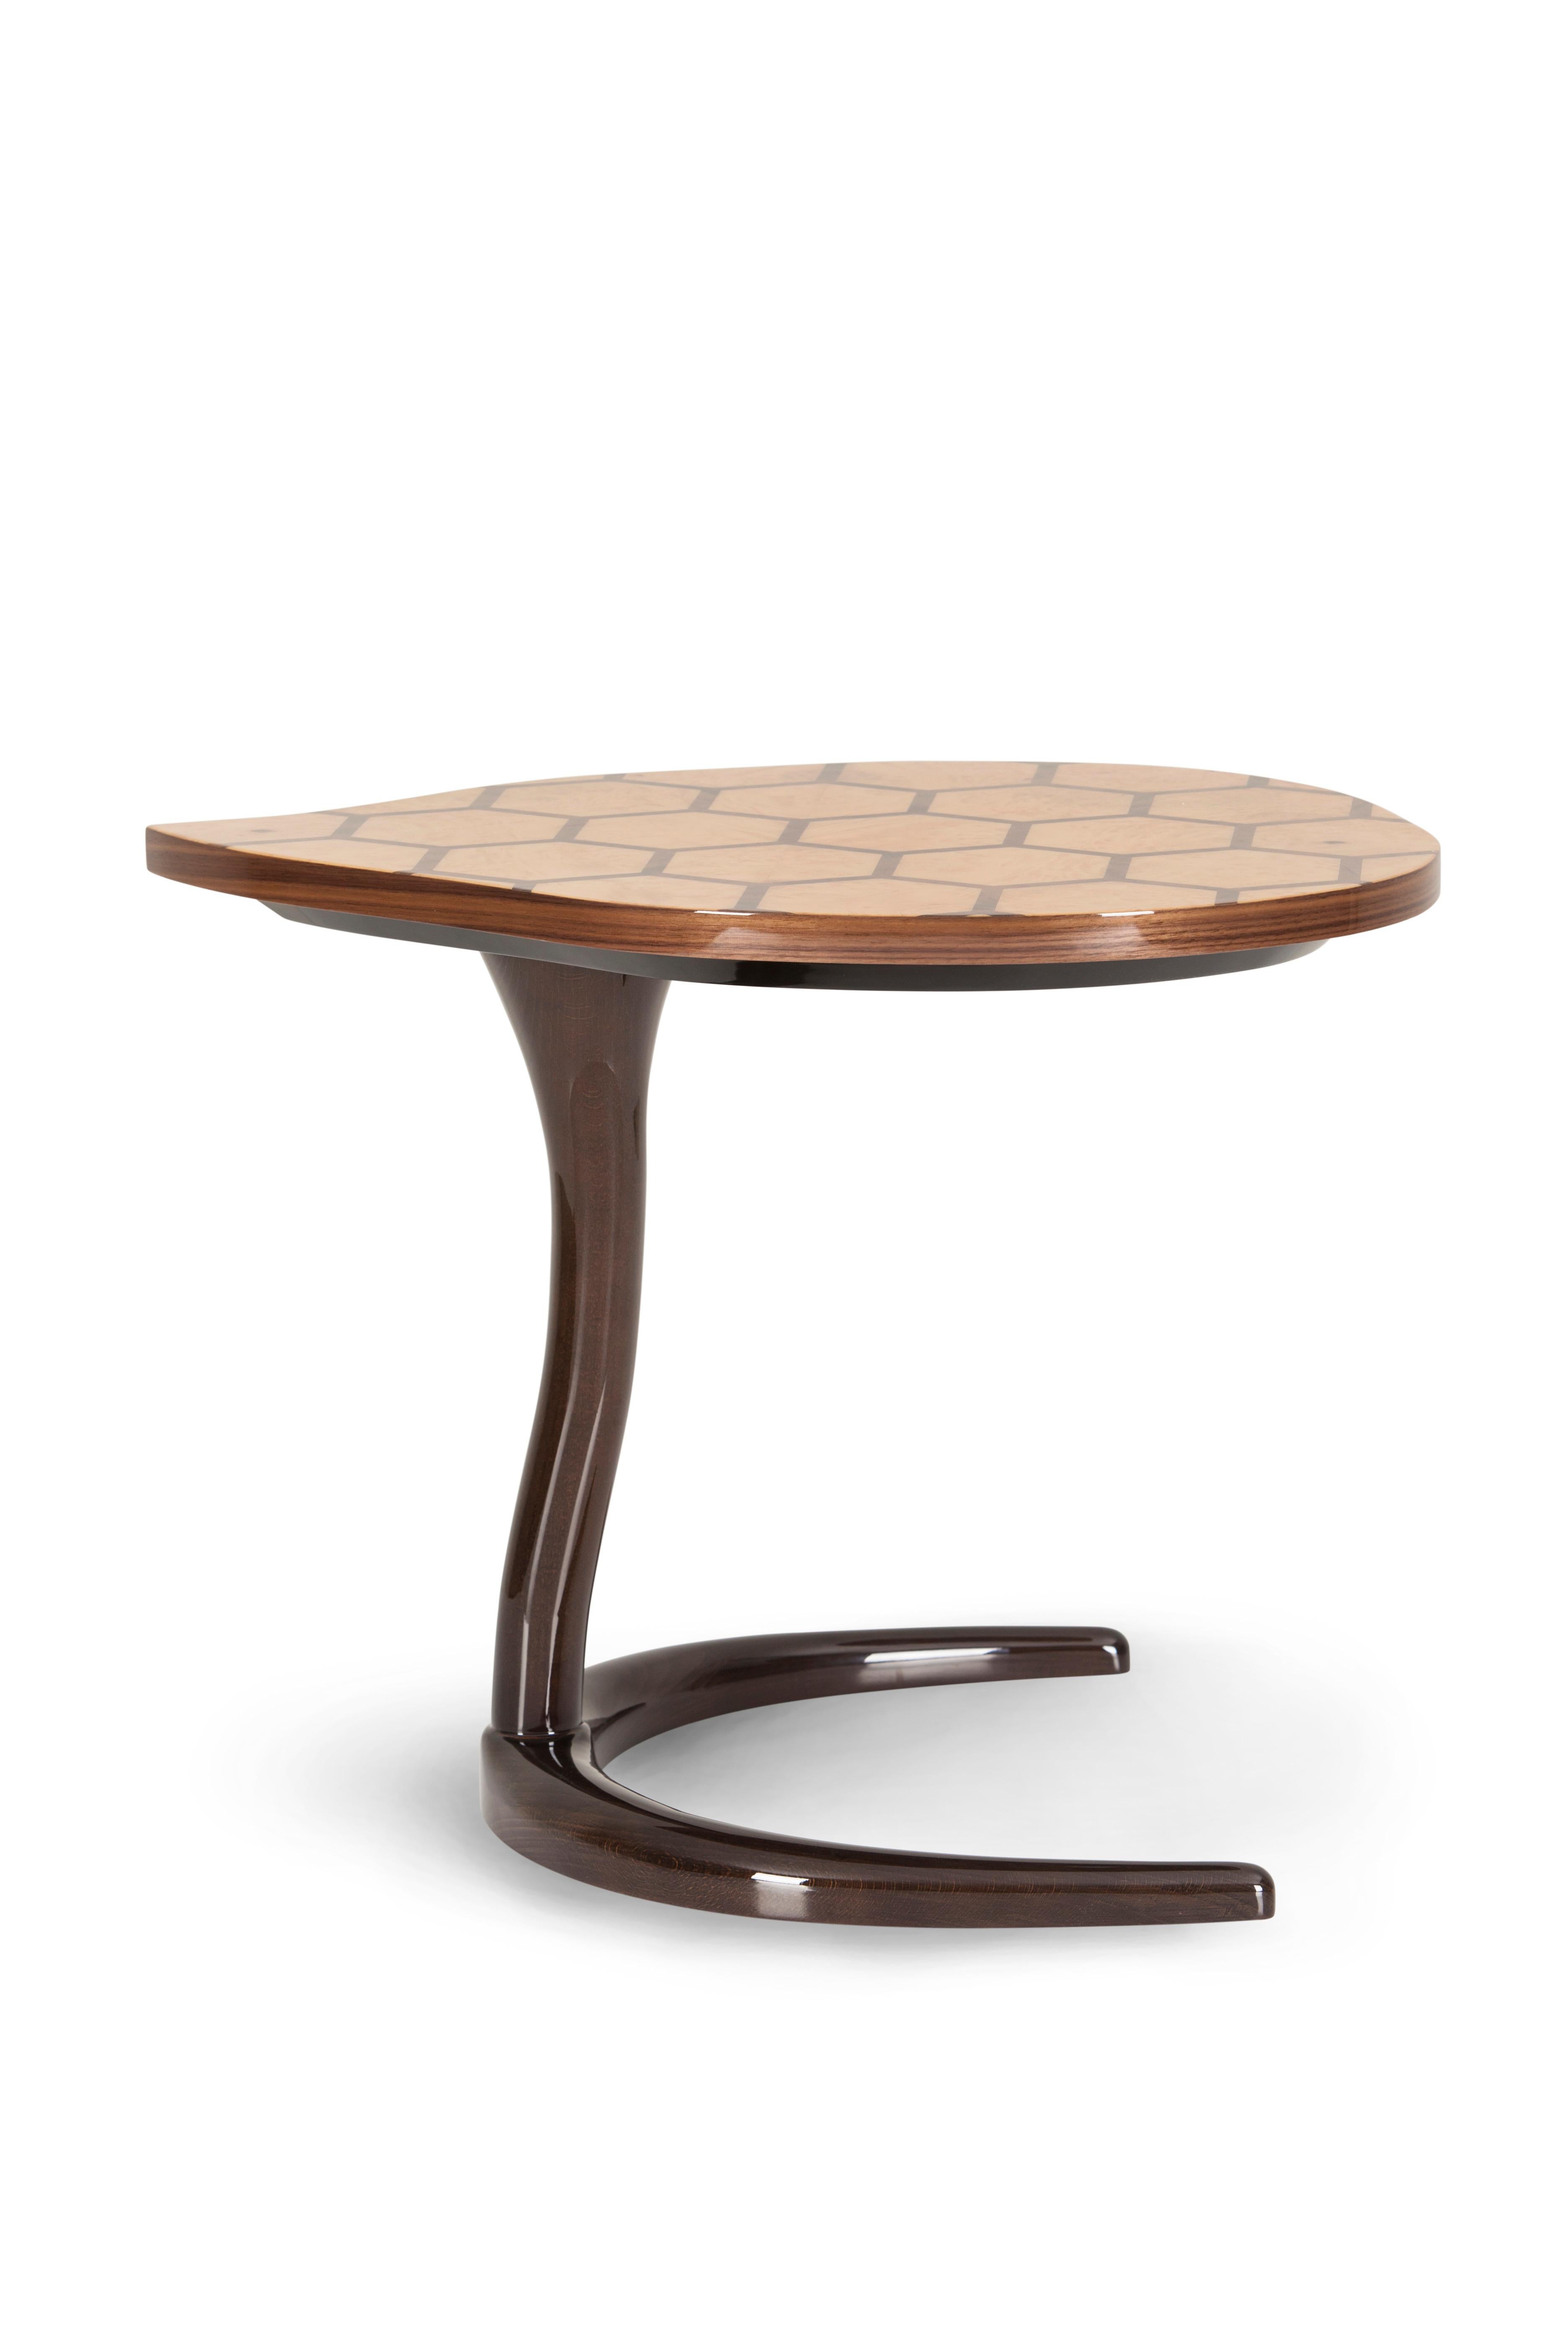 Marquetry Infinity Side Table, Handcrafted in Portugal - Europe by Greenapple.

Handcrafted with precision and care, the Infinity side table presents the art of marquetry in its most refined form, where high-quality wood veneers seamlessly merge to